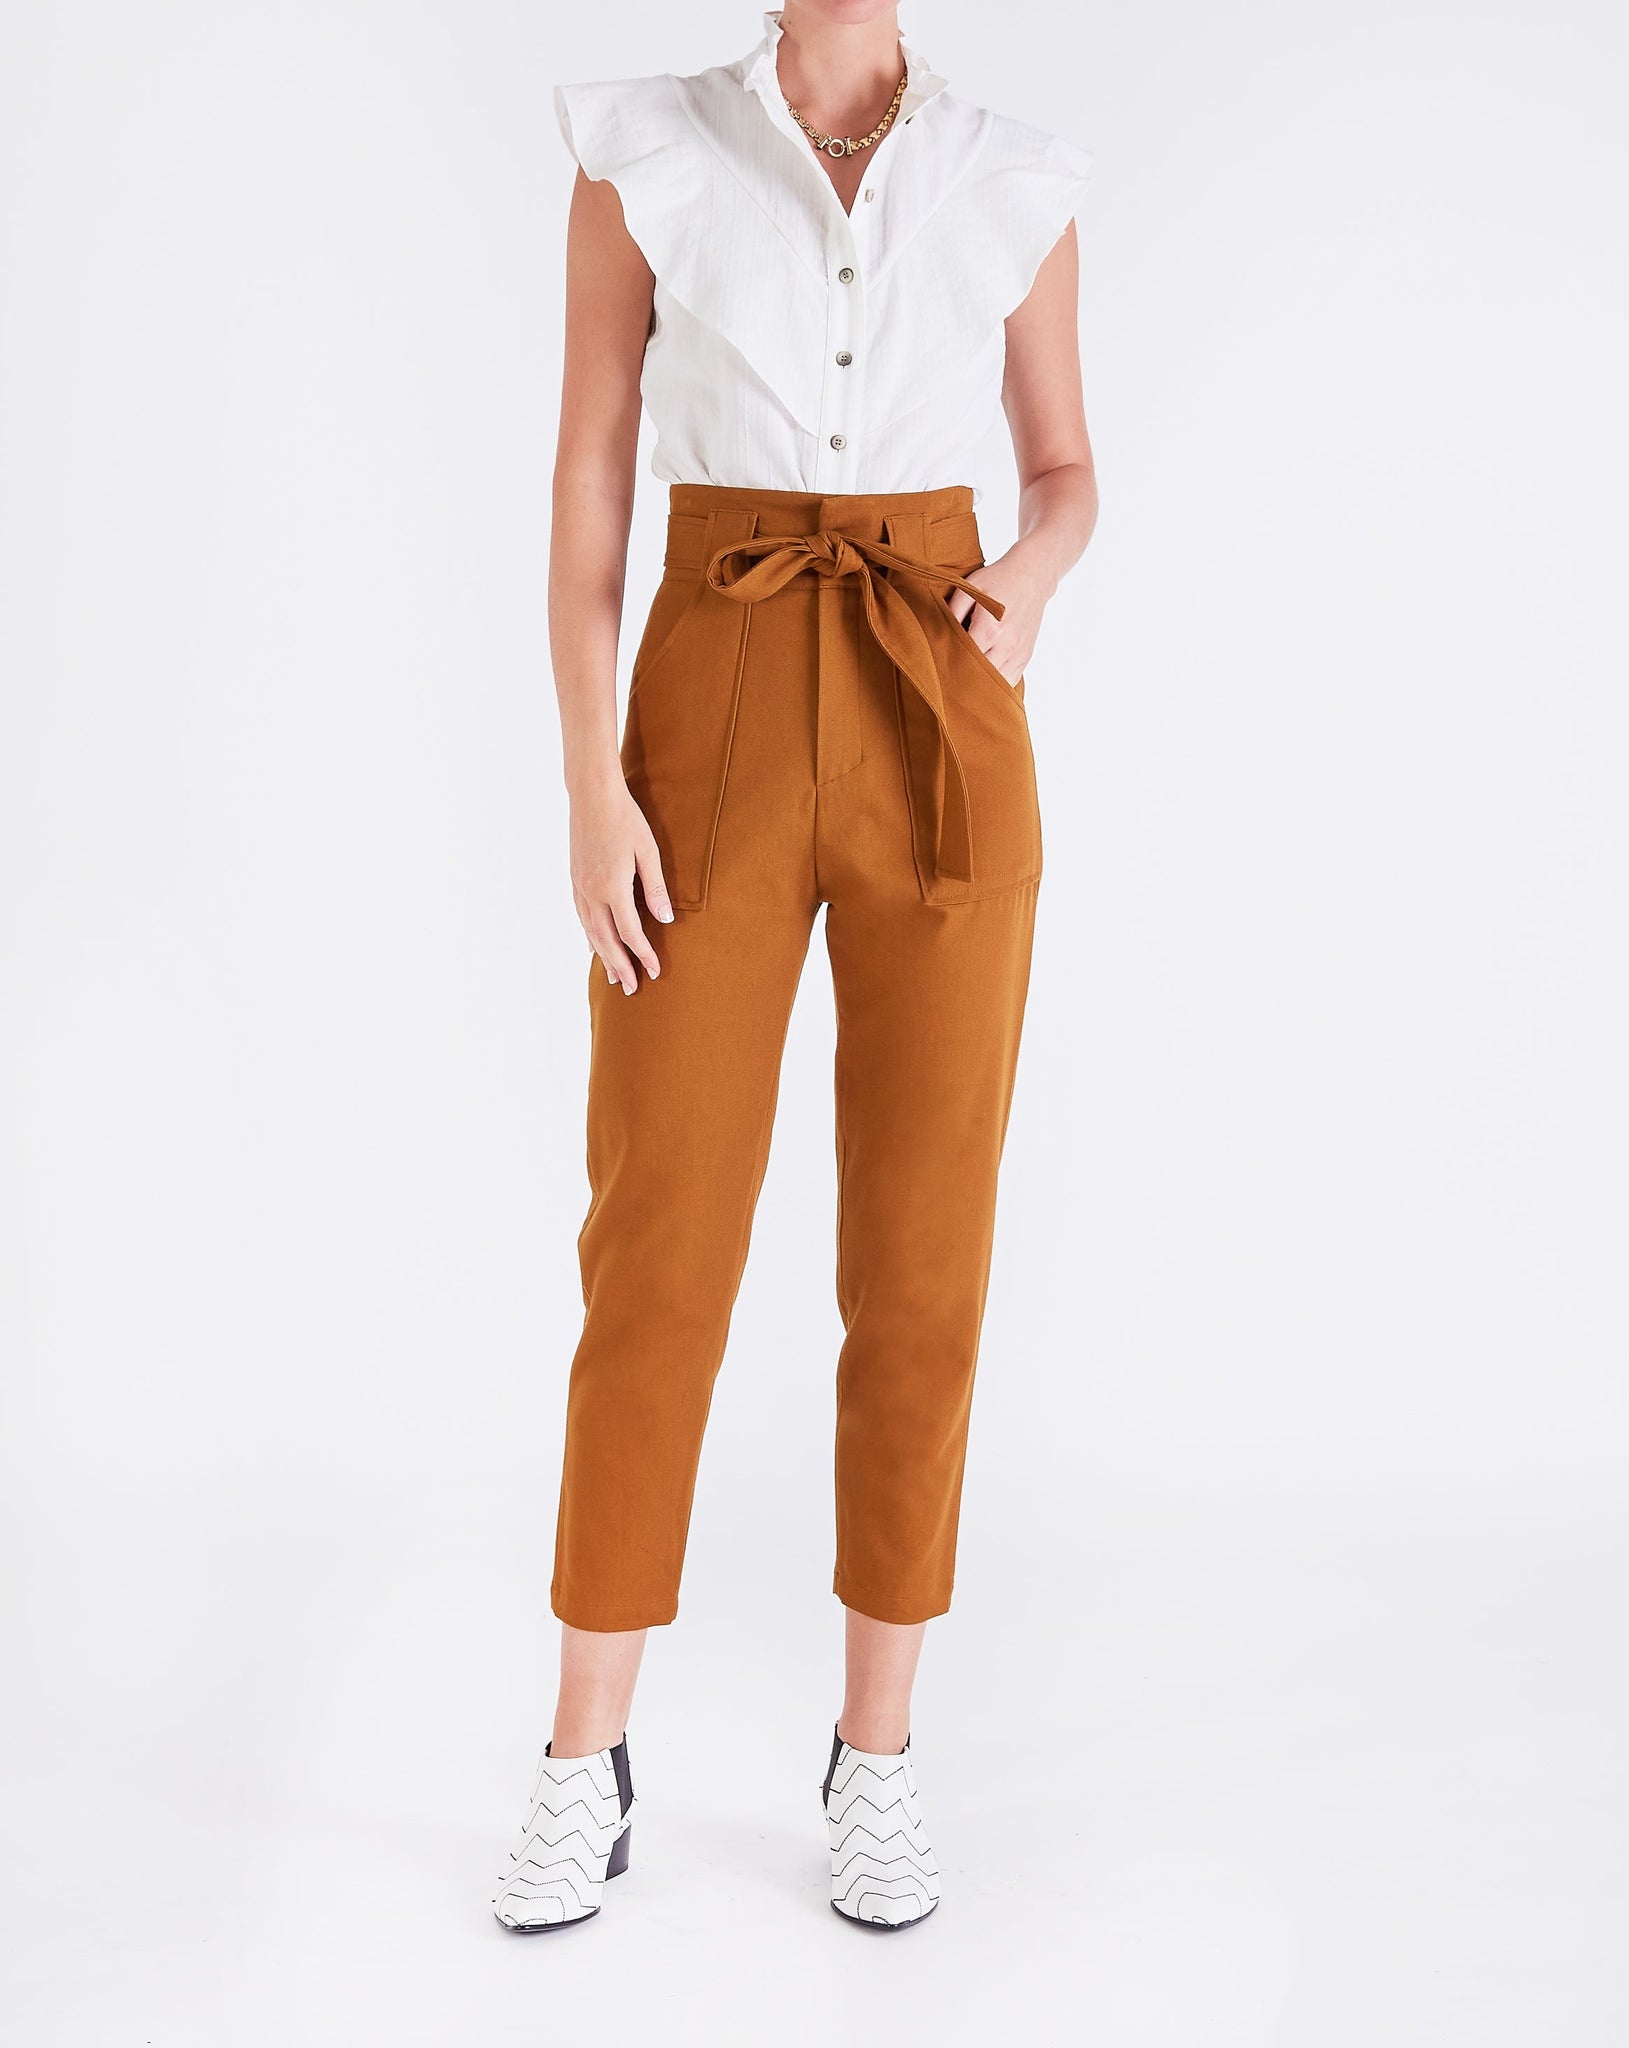 Val UTILITY BELTED PEG TROUSERS - GOLDEN BROWN